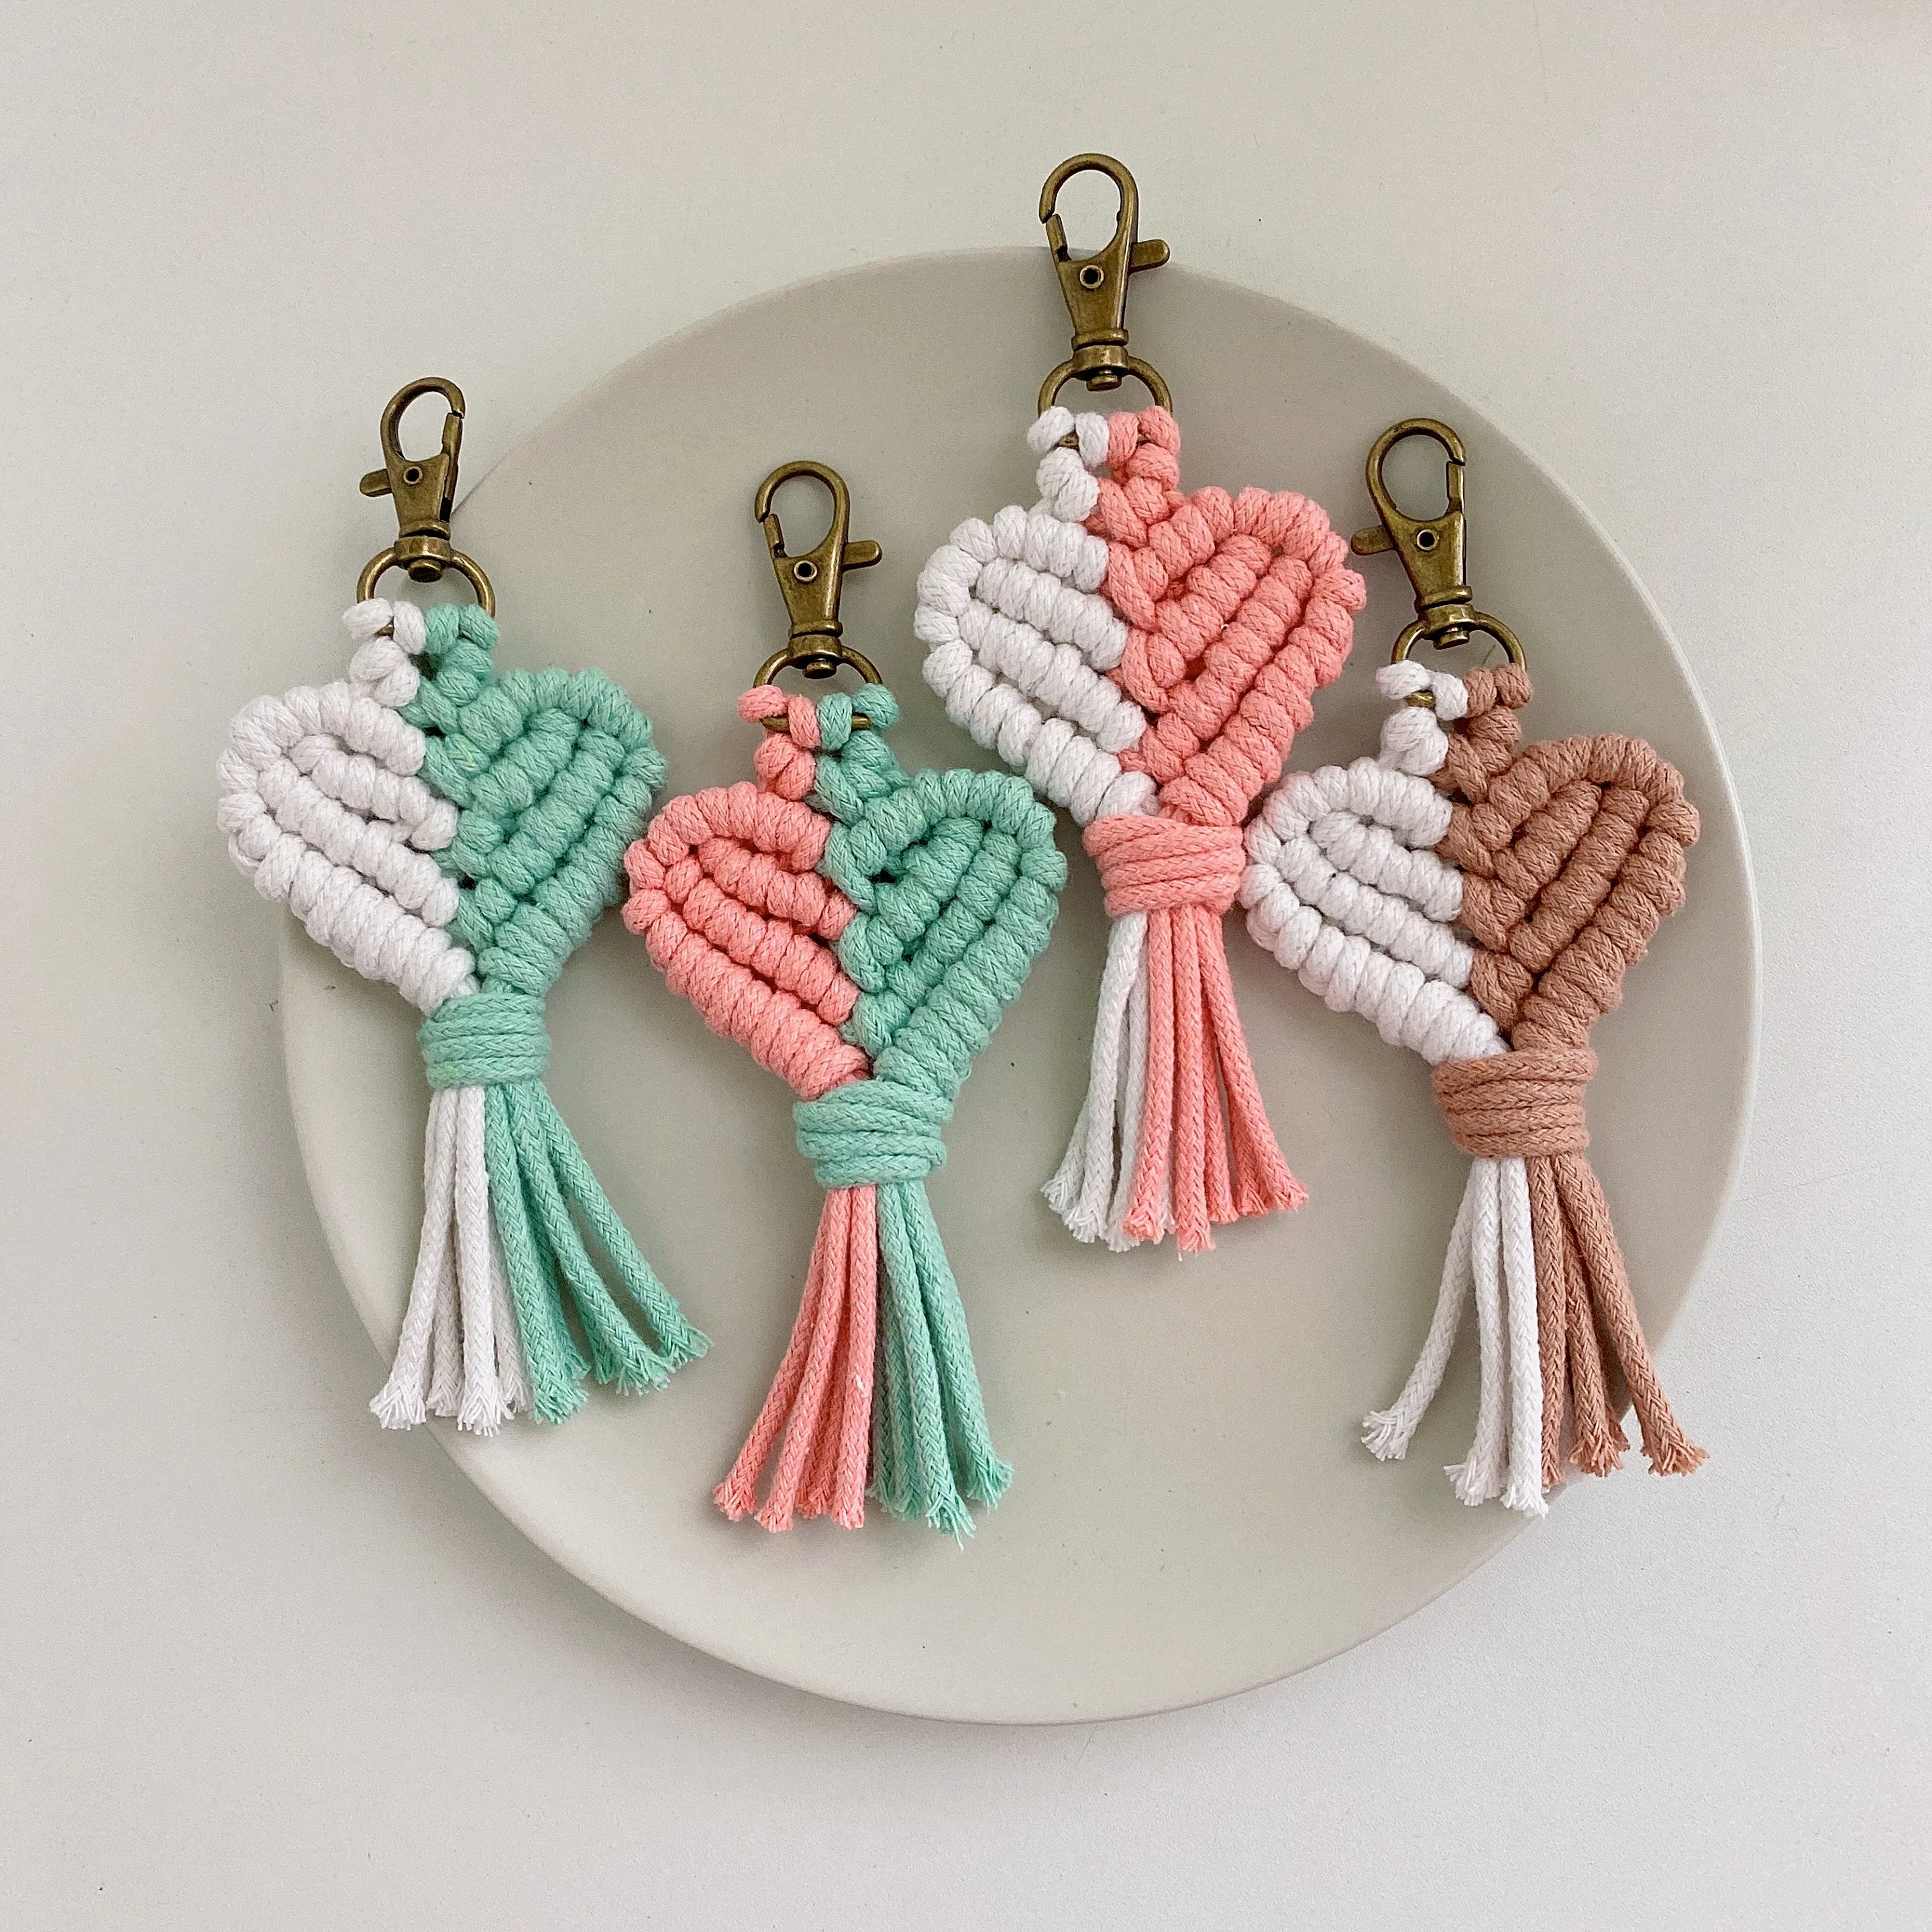 Macrame Hobo Keychain Handmade Heart-shaped Bag Pendant Gift Car Keys Mother's Day gift Fashion Jewelry Accessories Wholesale adjustable leather bag shoulder strap fit for longchamp hobo crossbody armpit bags replacement belt strap diy repair accessories